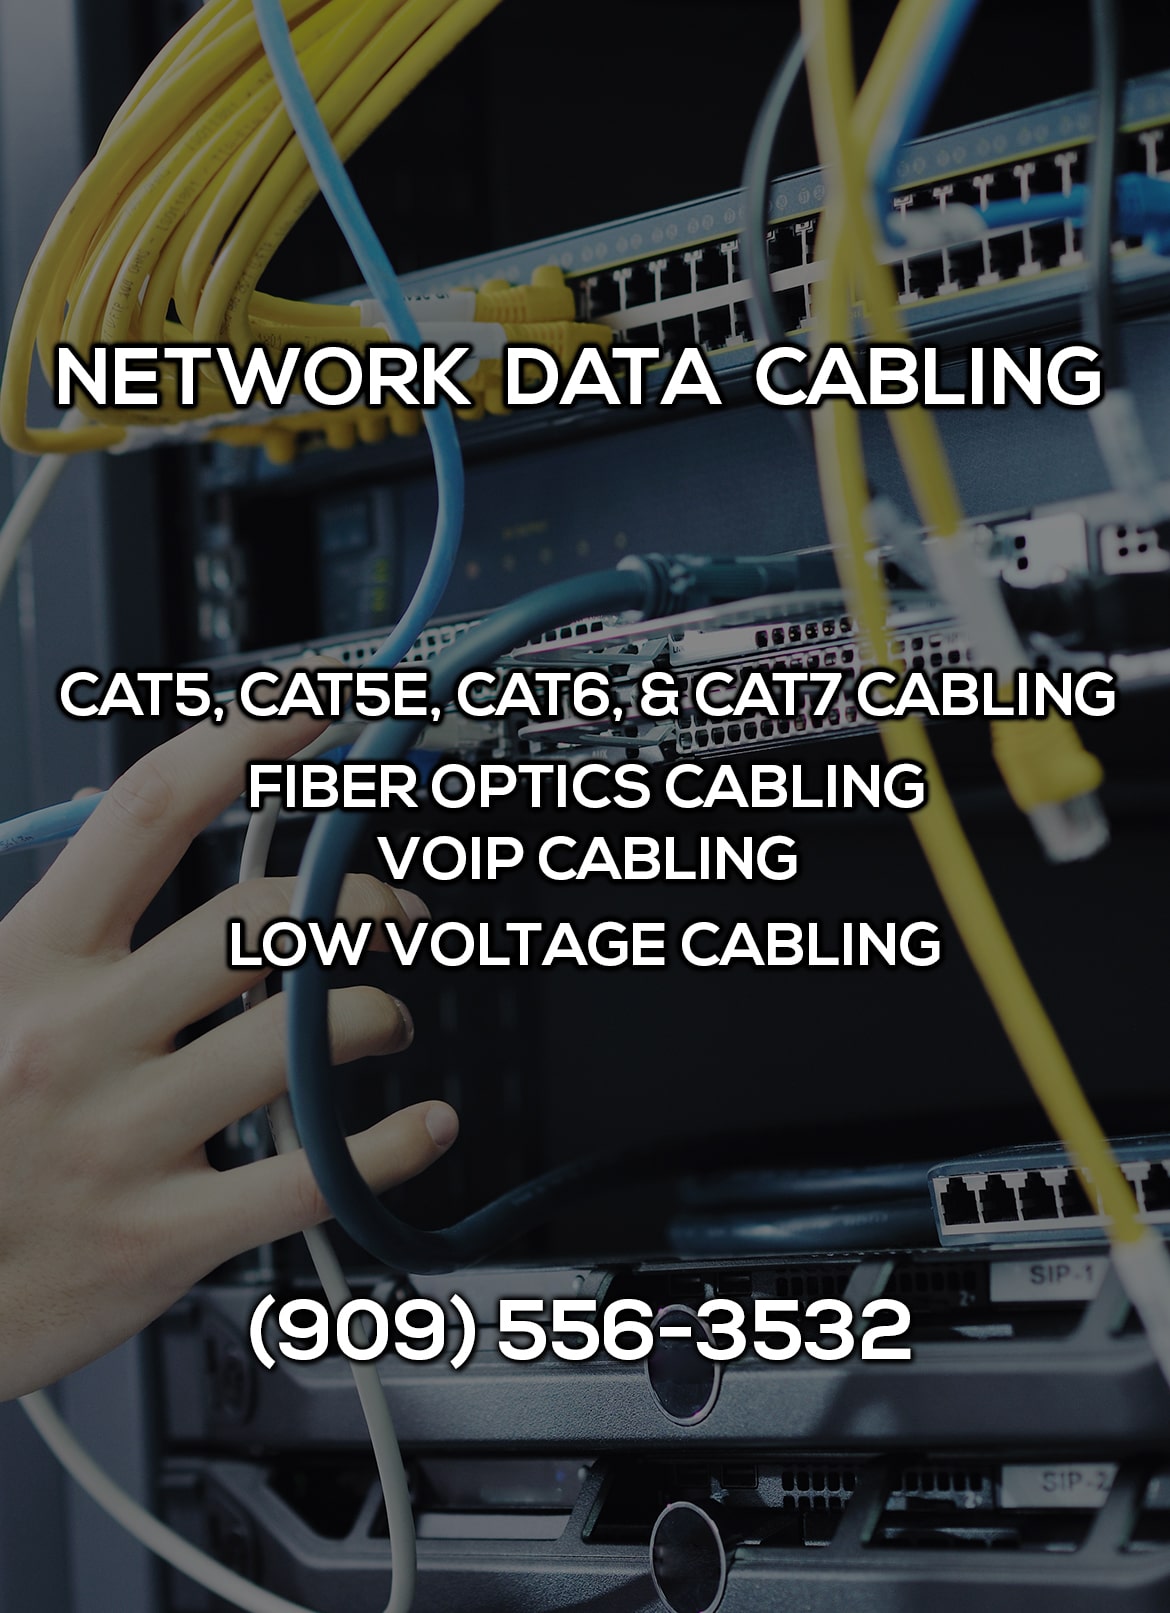 Network Data Cabling in Chino CA